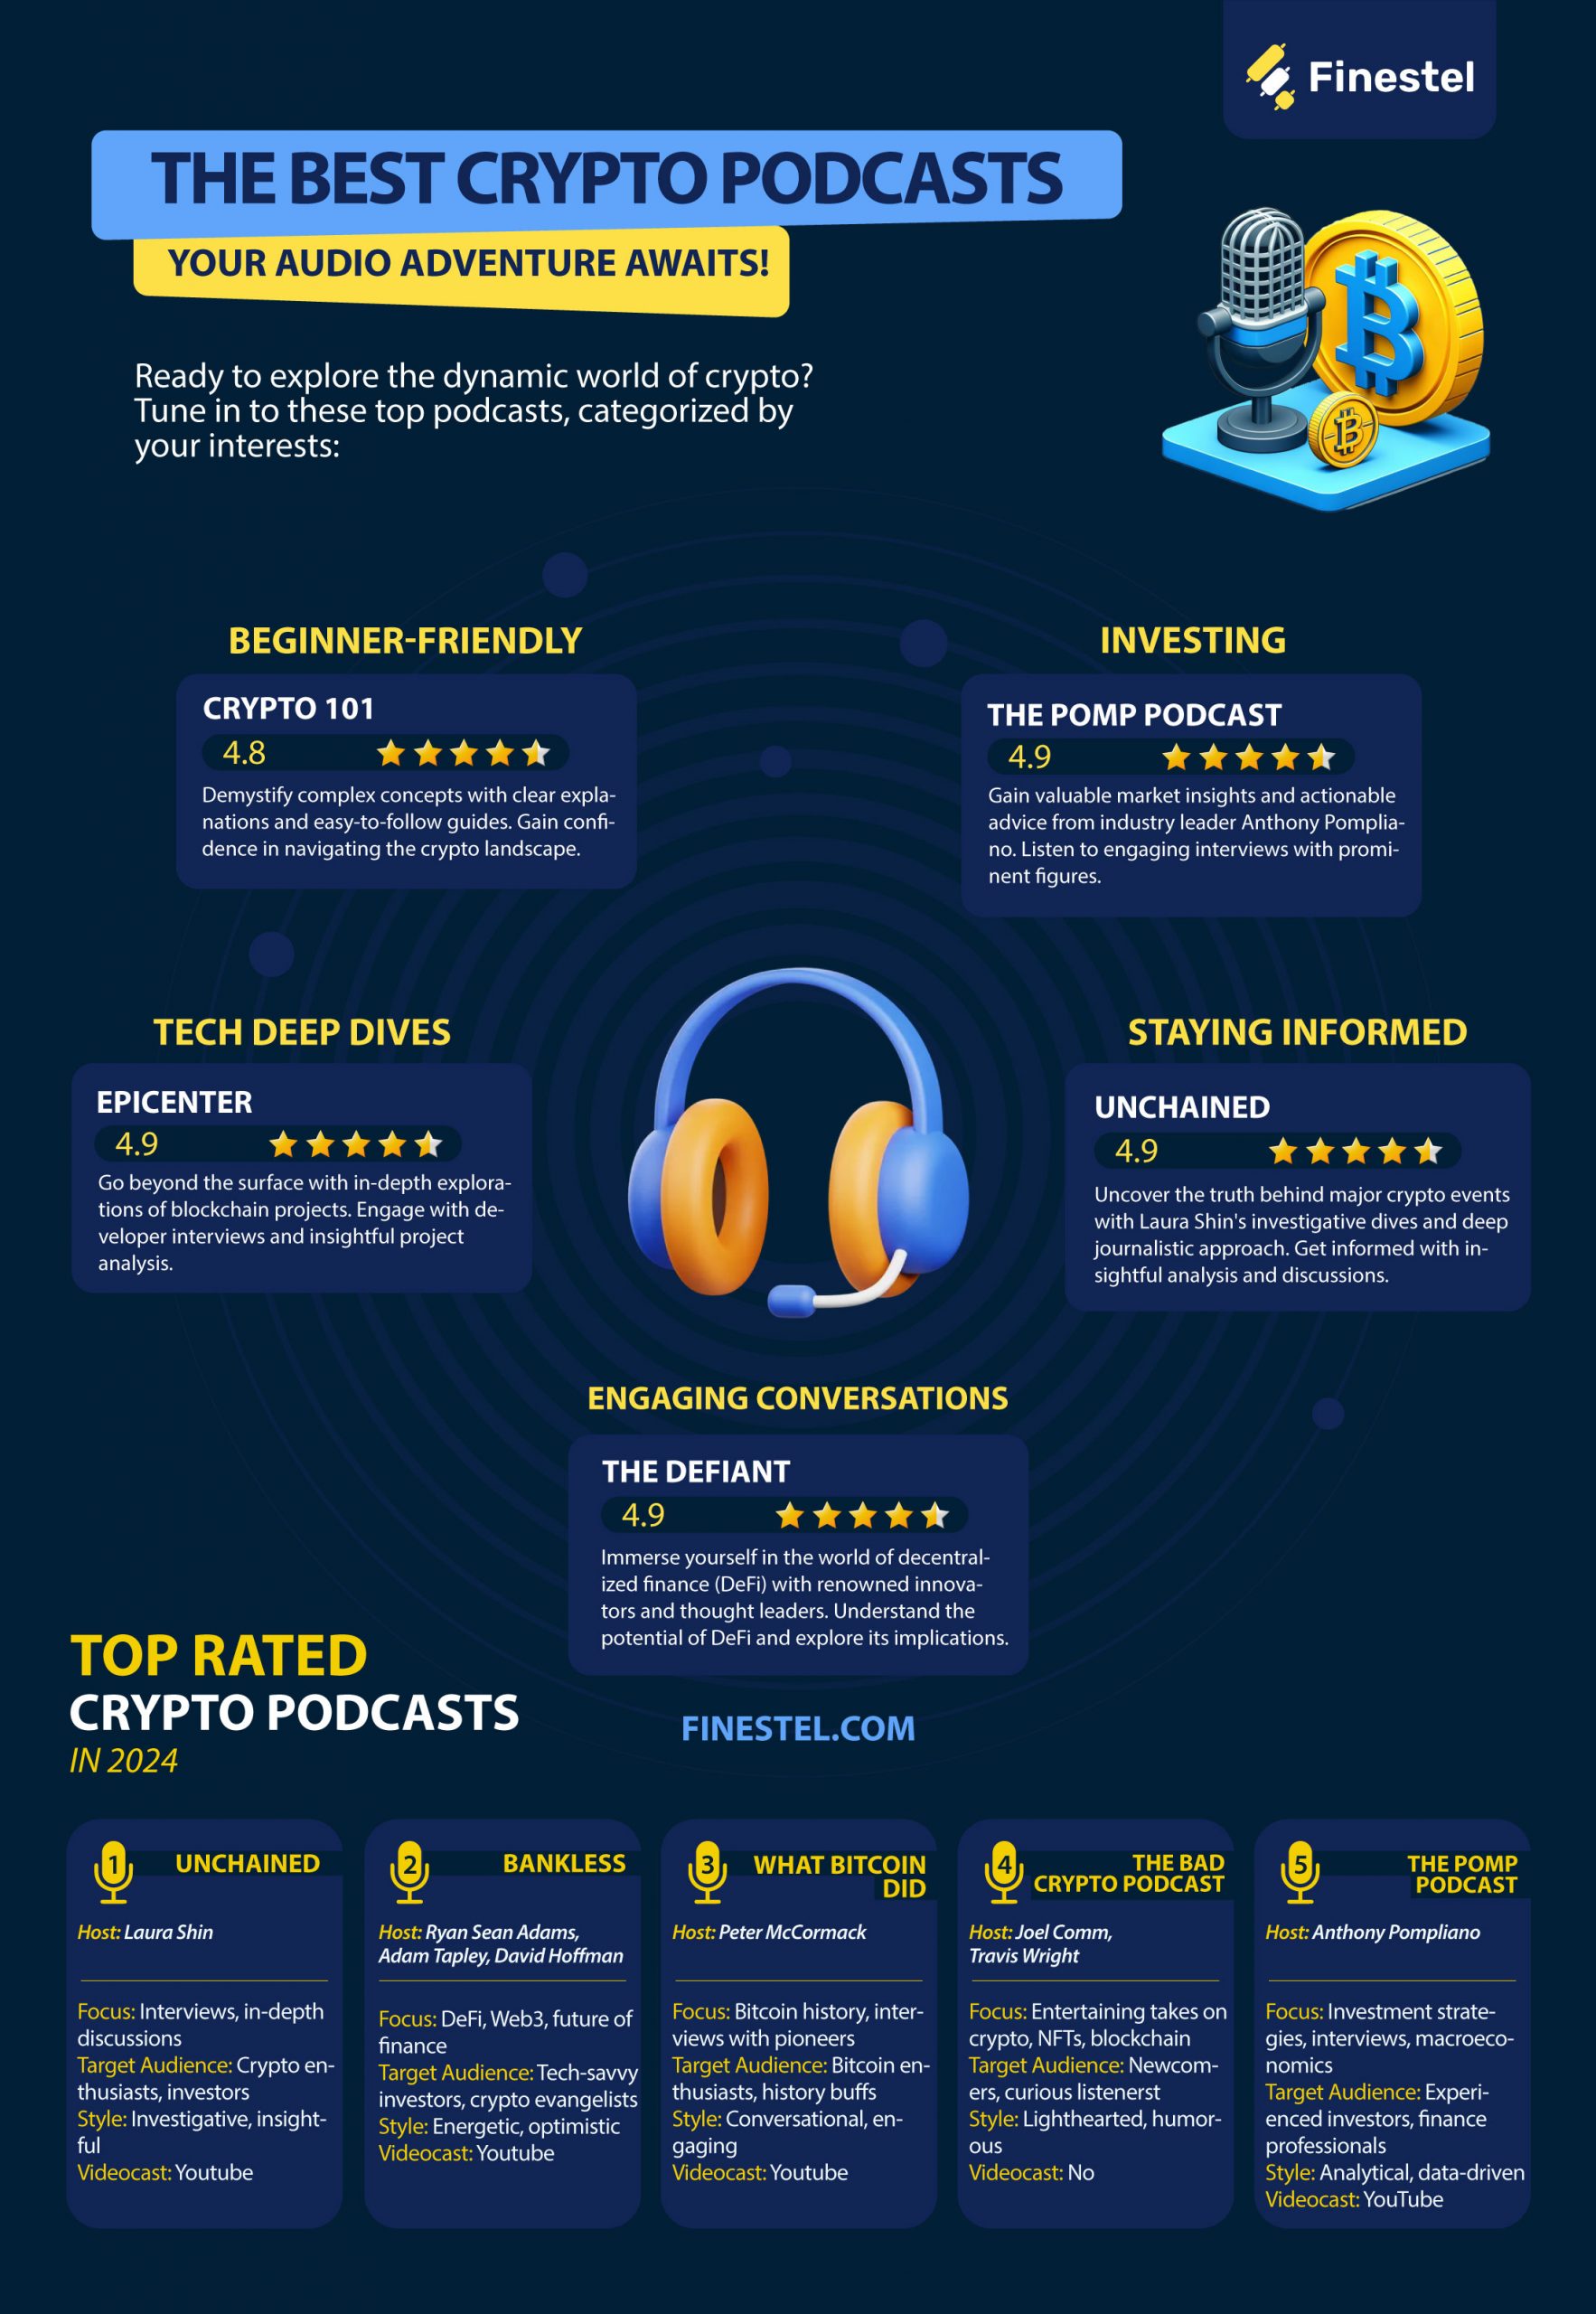 The Best Crypto Podcasts in 2024 Infographic